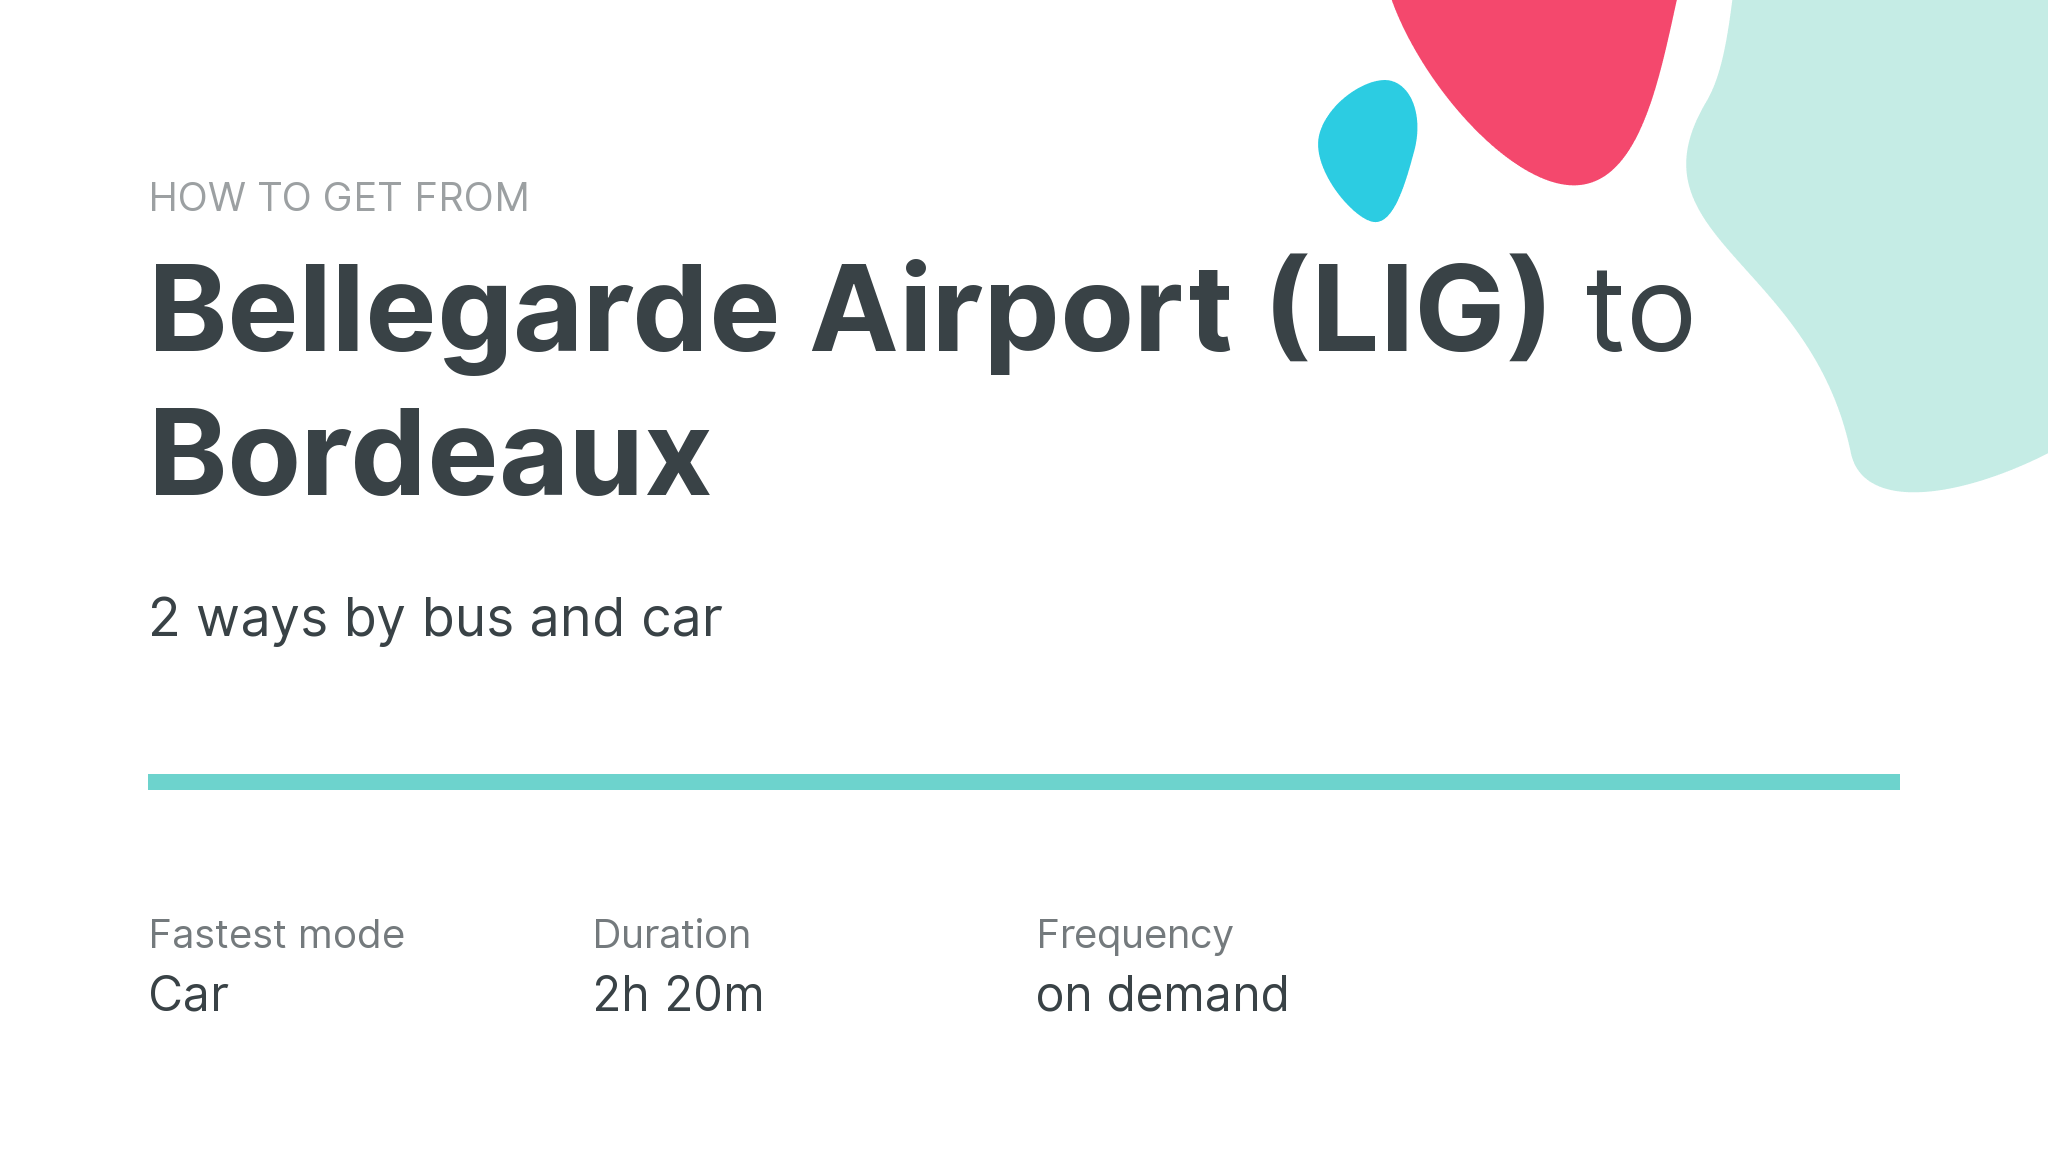 How do I get from Bellegarde Airport (LIG) to Bordeaux